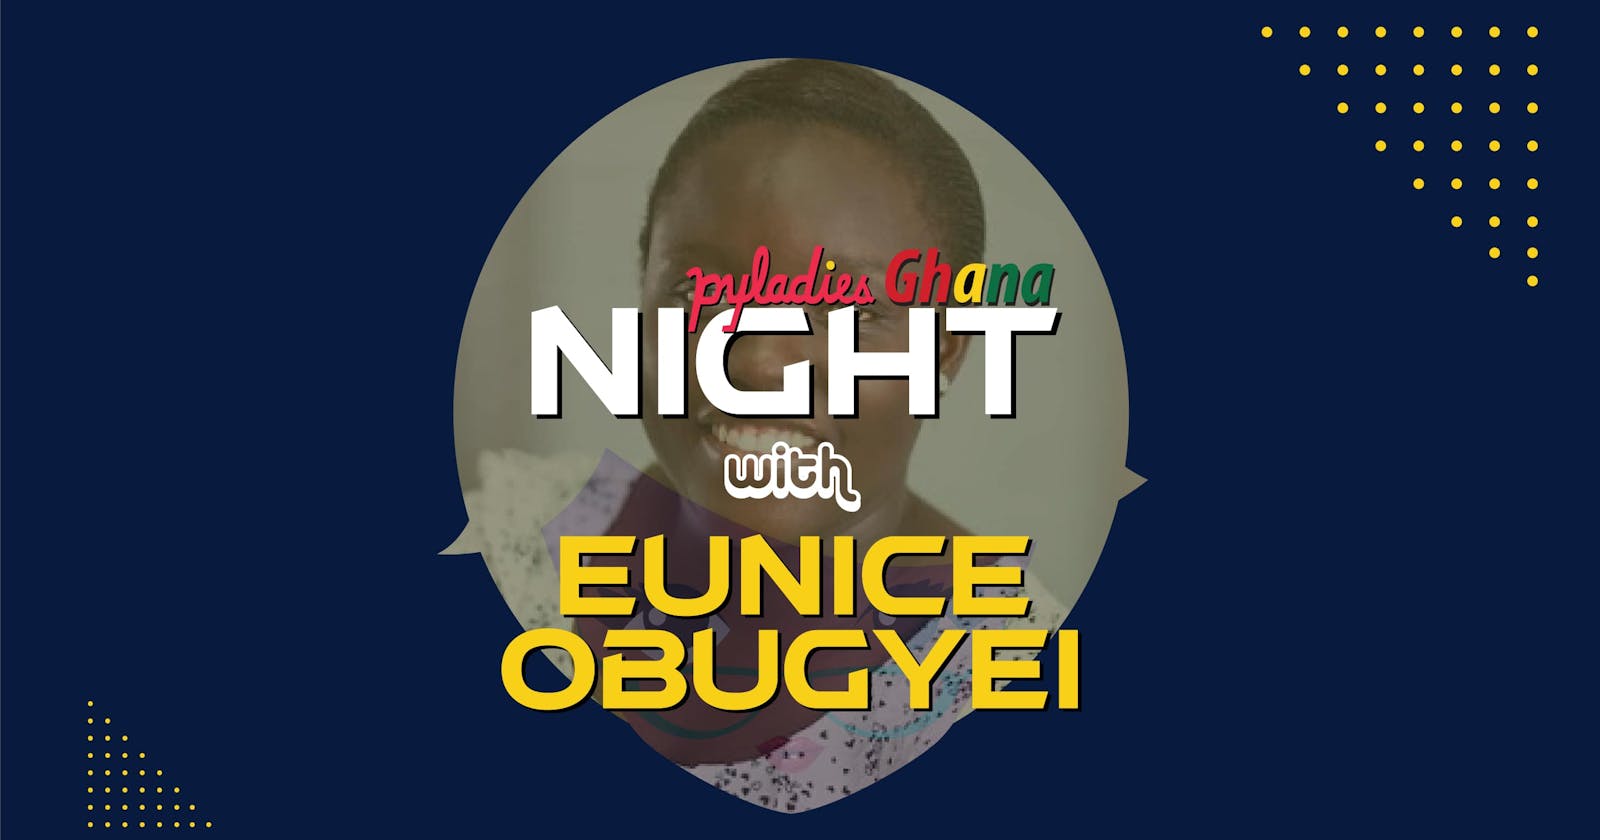 PyLadies Night with Eunice Obugyei - Starting a Project, Staying Productive